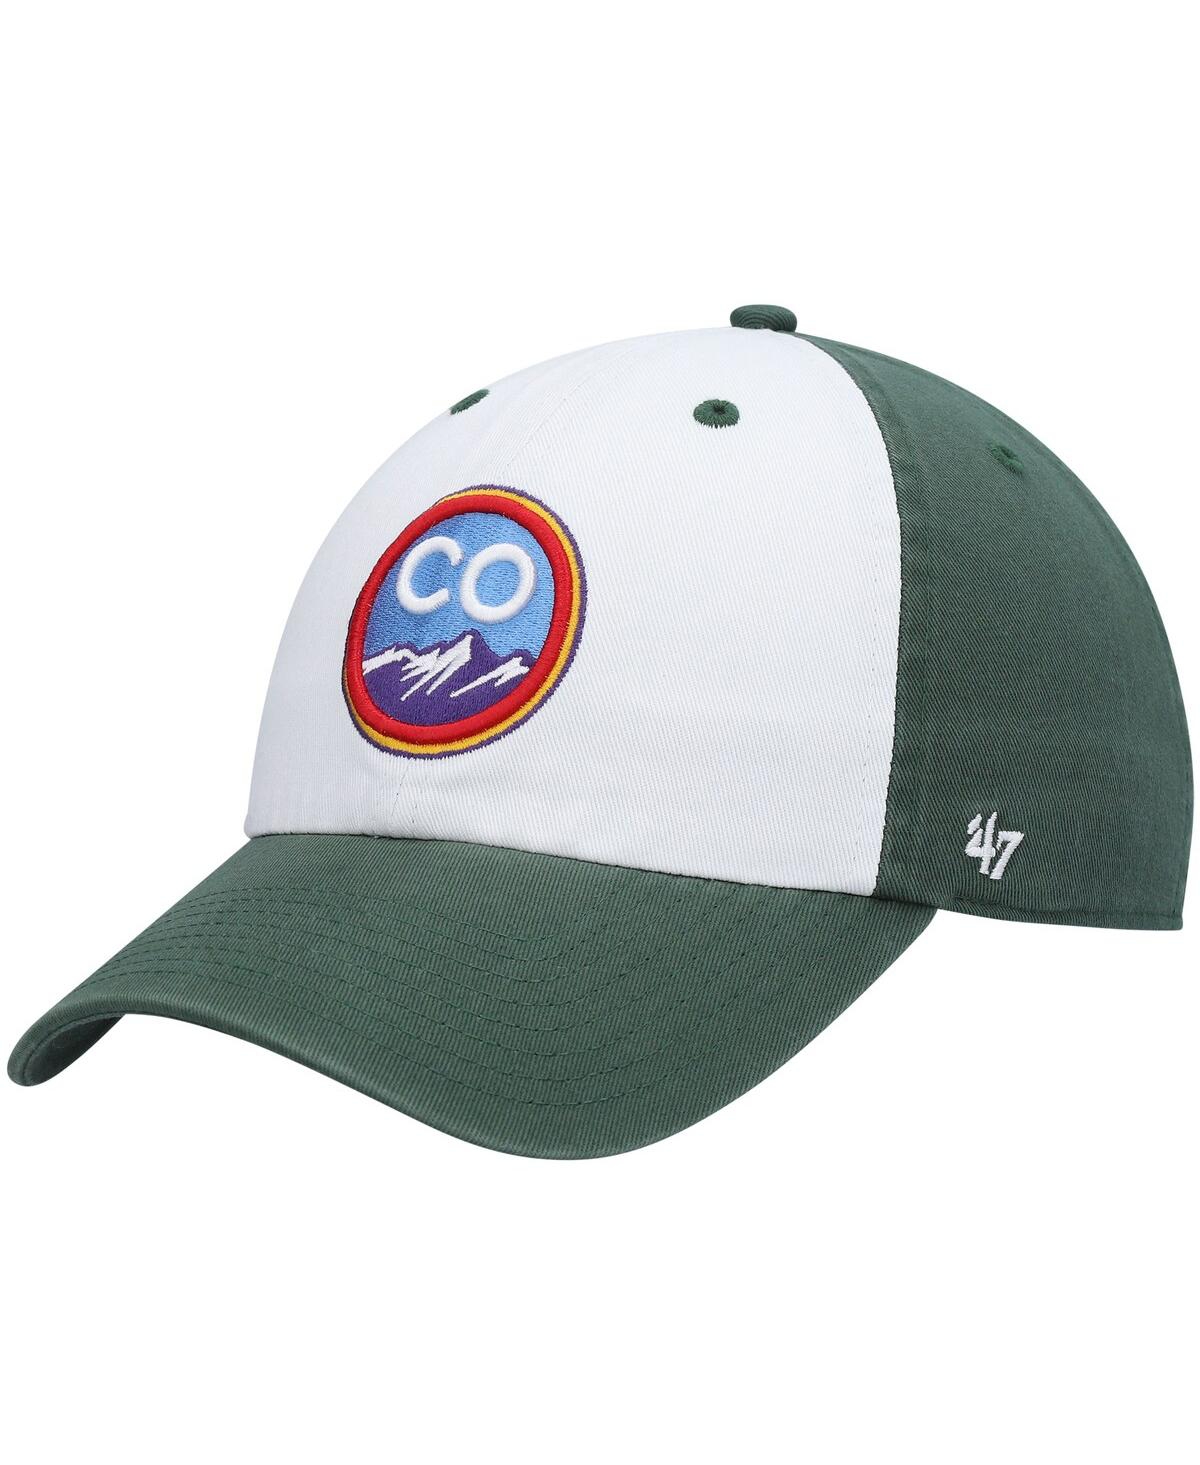 47 BRAND MEN'S '47 BRAND WHITE AND GREEN COLORADO ROCKIES AREA CODE CITY CONNECT CLEAN UP ADJUSTABLE HAT